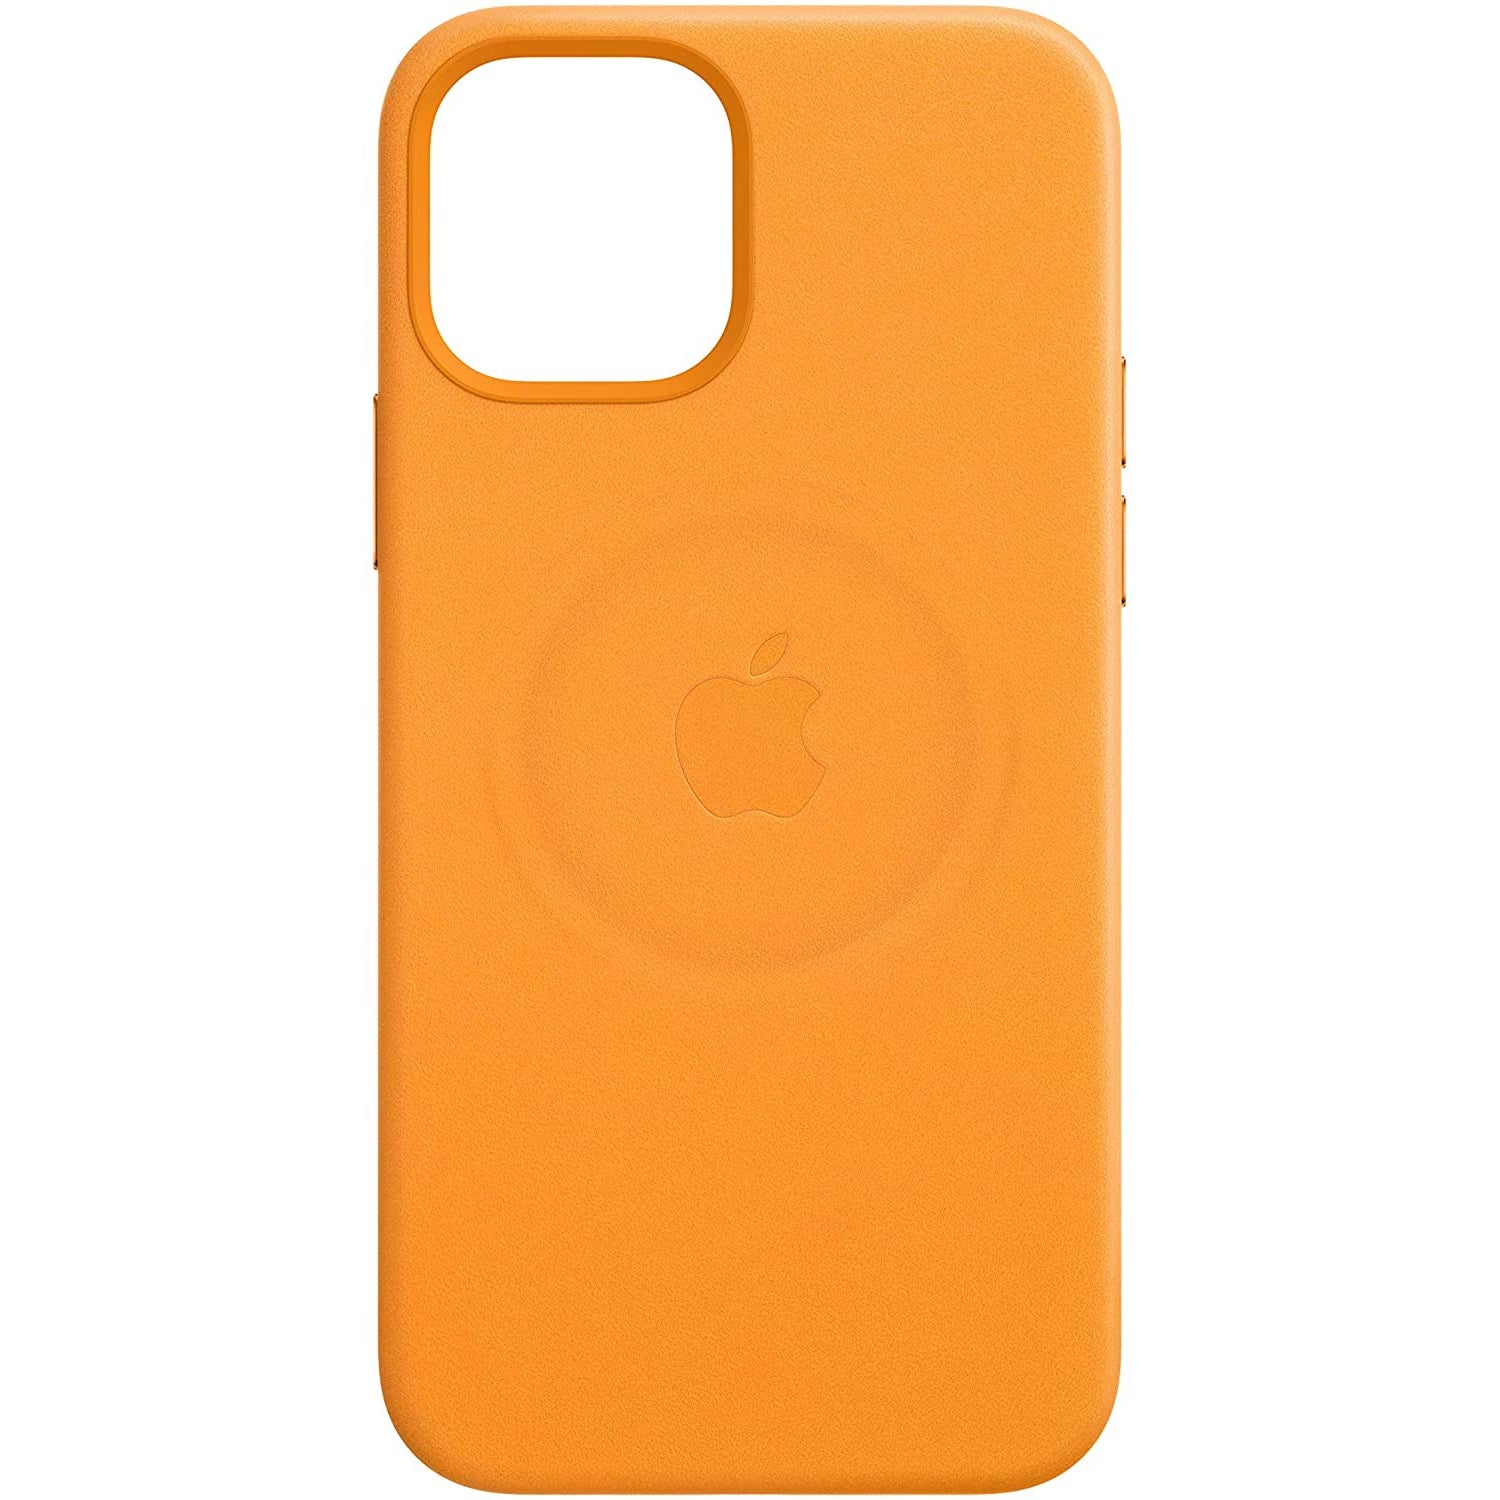 Apple Leather Case with MagSafe (for iPhone 12 | 12 Pro) - California Poppy